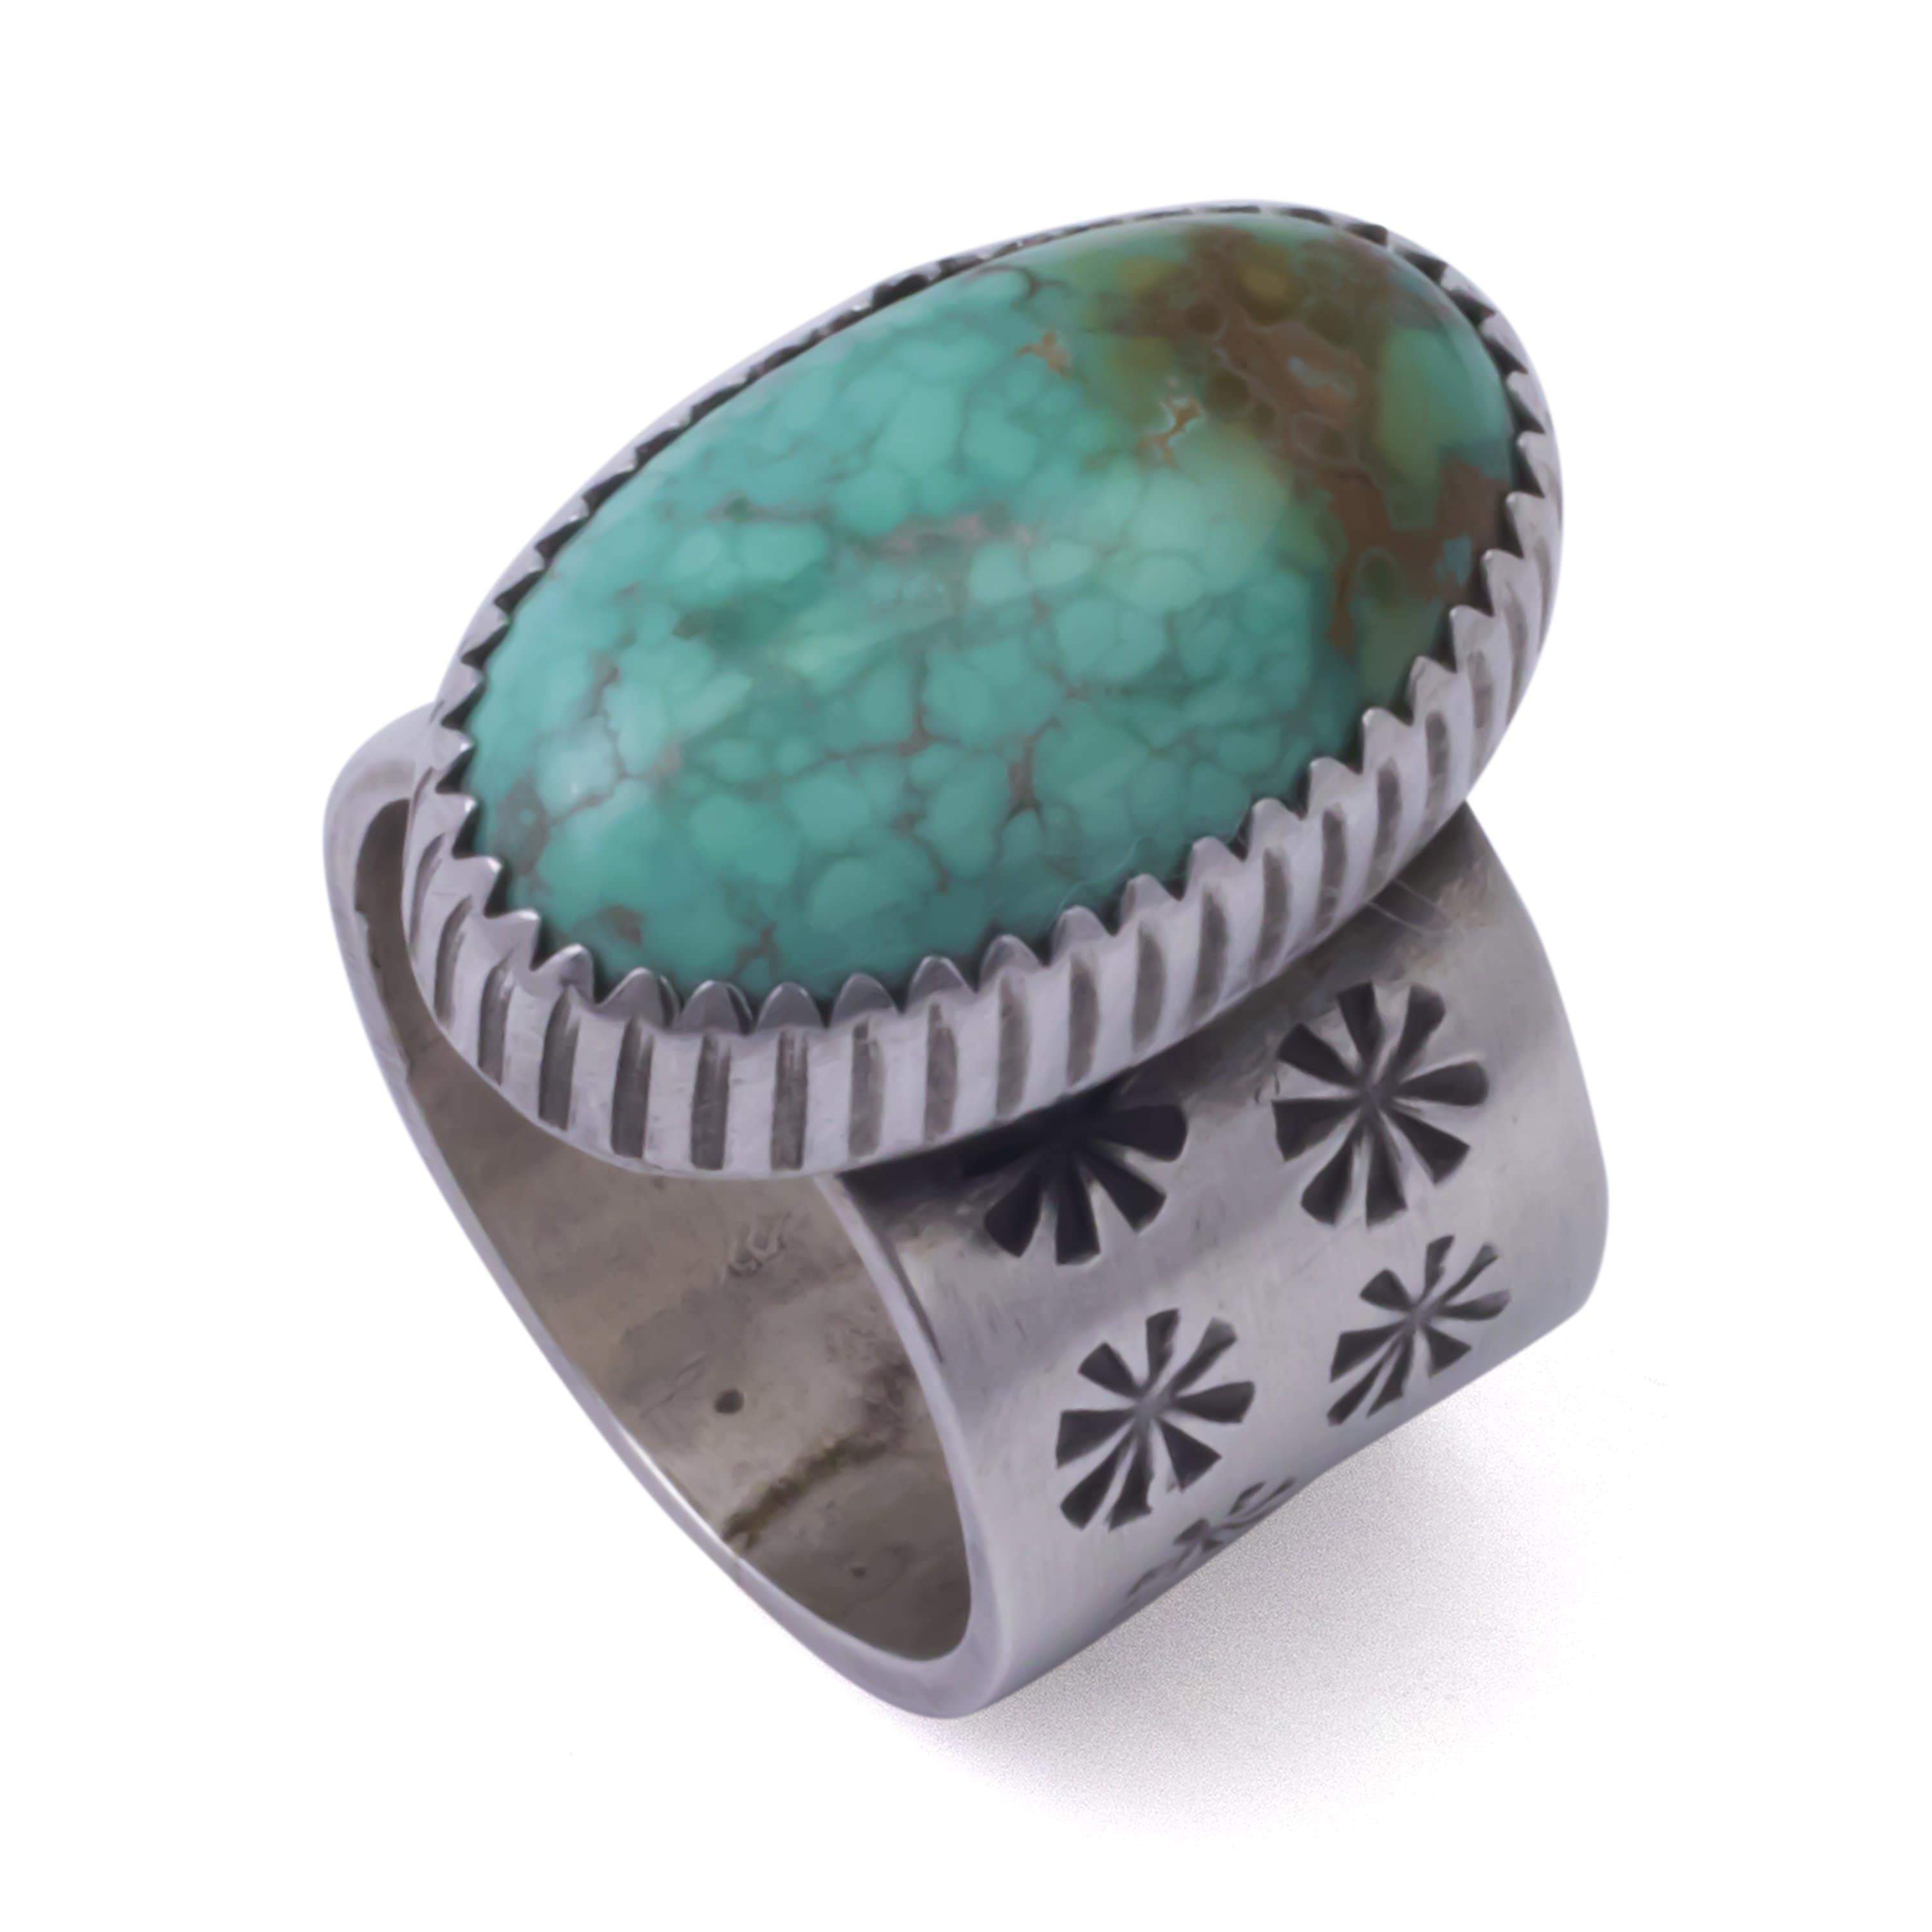 Kalifano Native American Jewelry 6 Randal Endito Carico Lake Turquoise Native American Made 925 Sterling Silver Ring NAR600.001.6